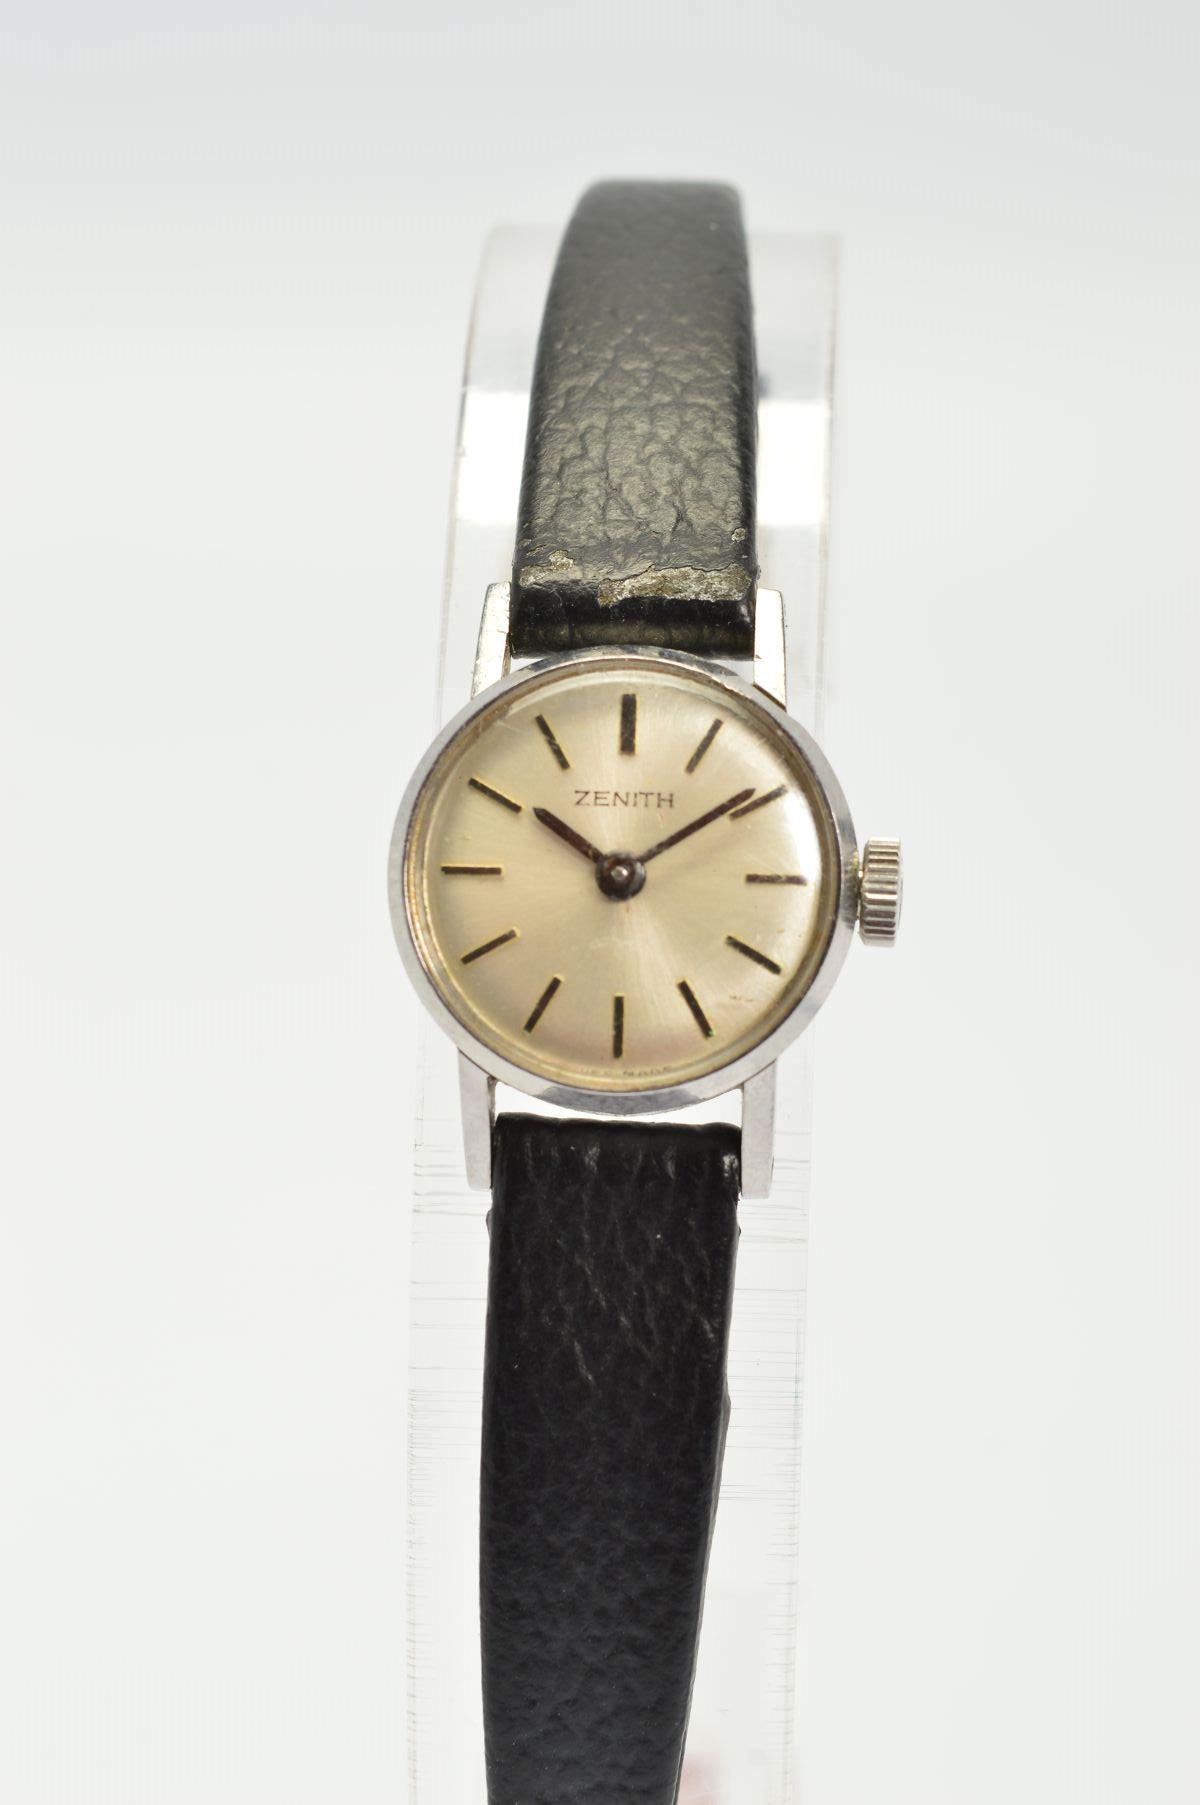 A ZENITH MECHANICAL LADIES COCKTAIL WRISTWATCH, silver baton dial, stainless steel case on a black